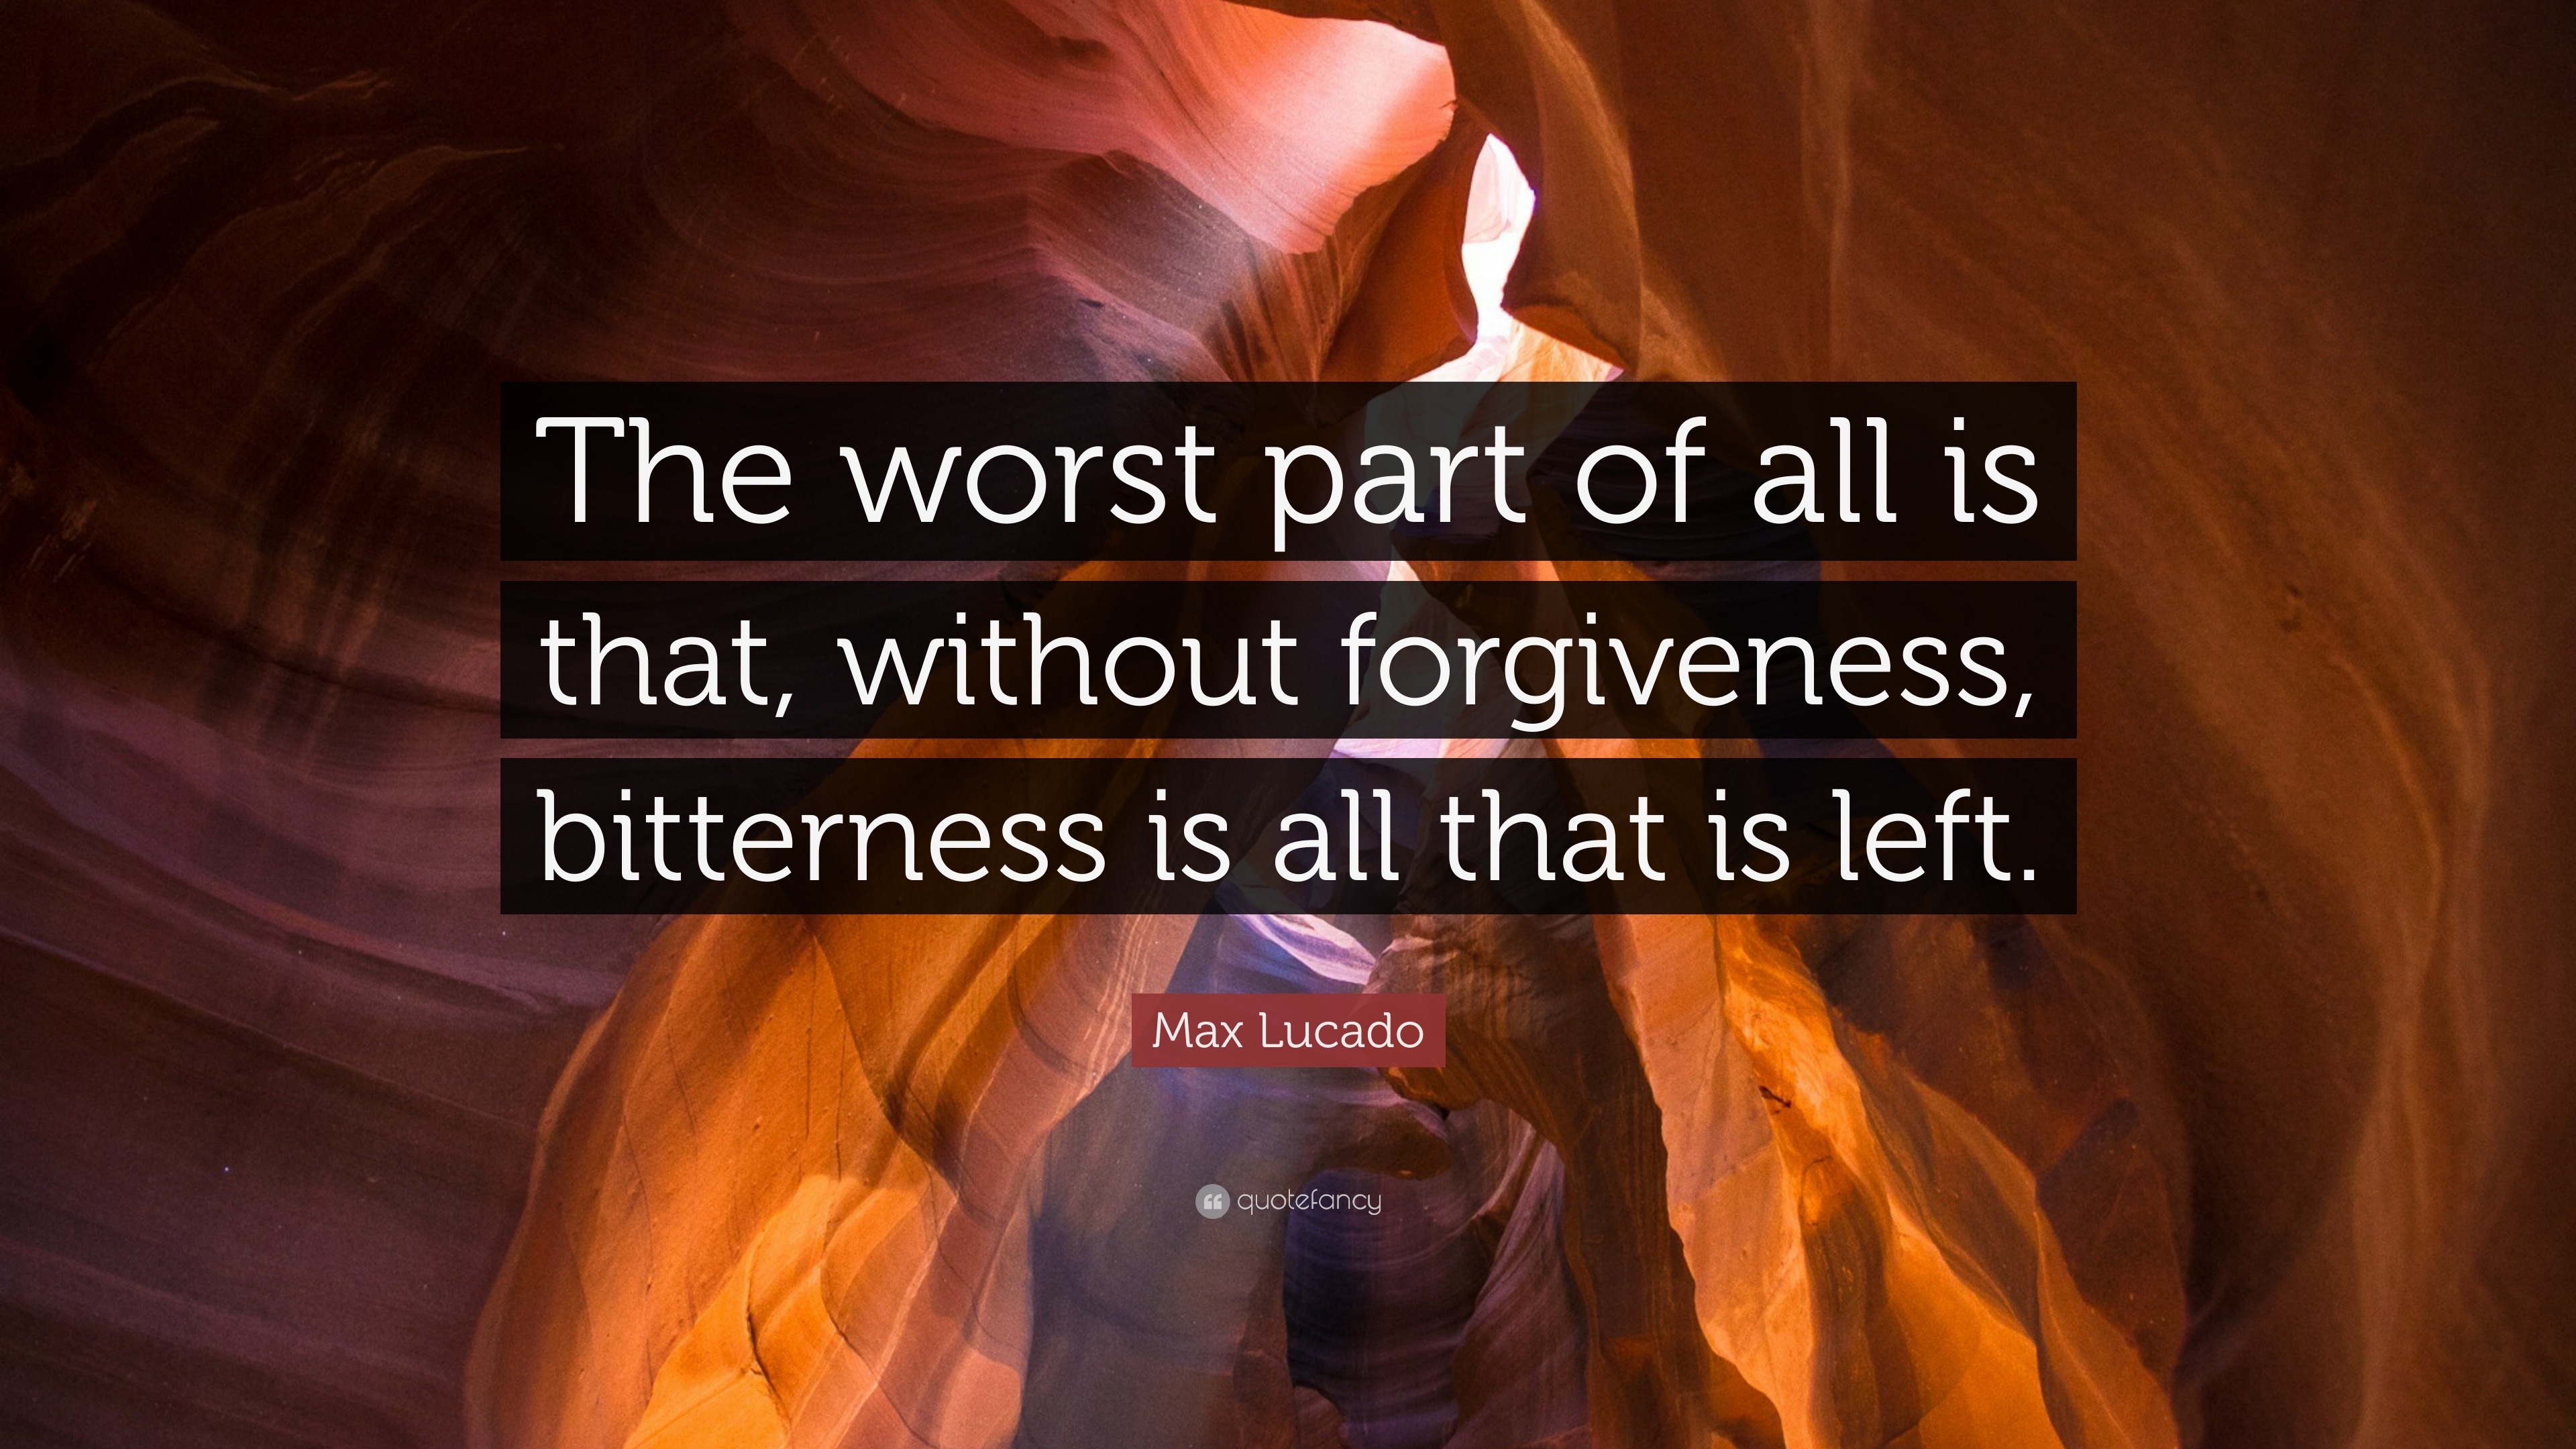 Max Lucado Quote “the Worst Part Of All Is That Without Forgiveness Bitterness Is All That Is